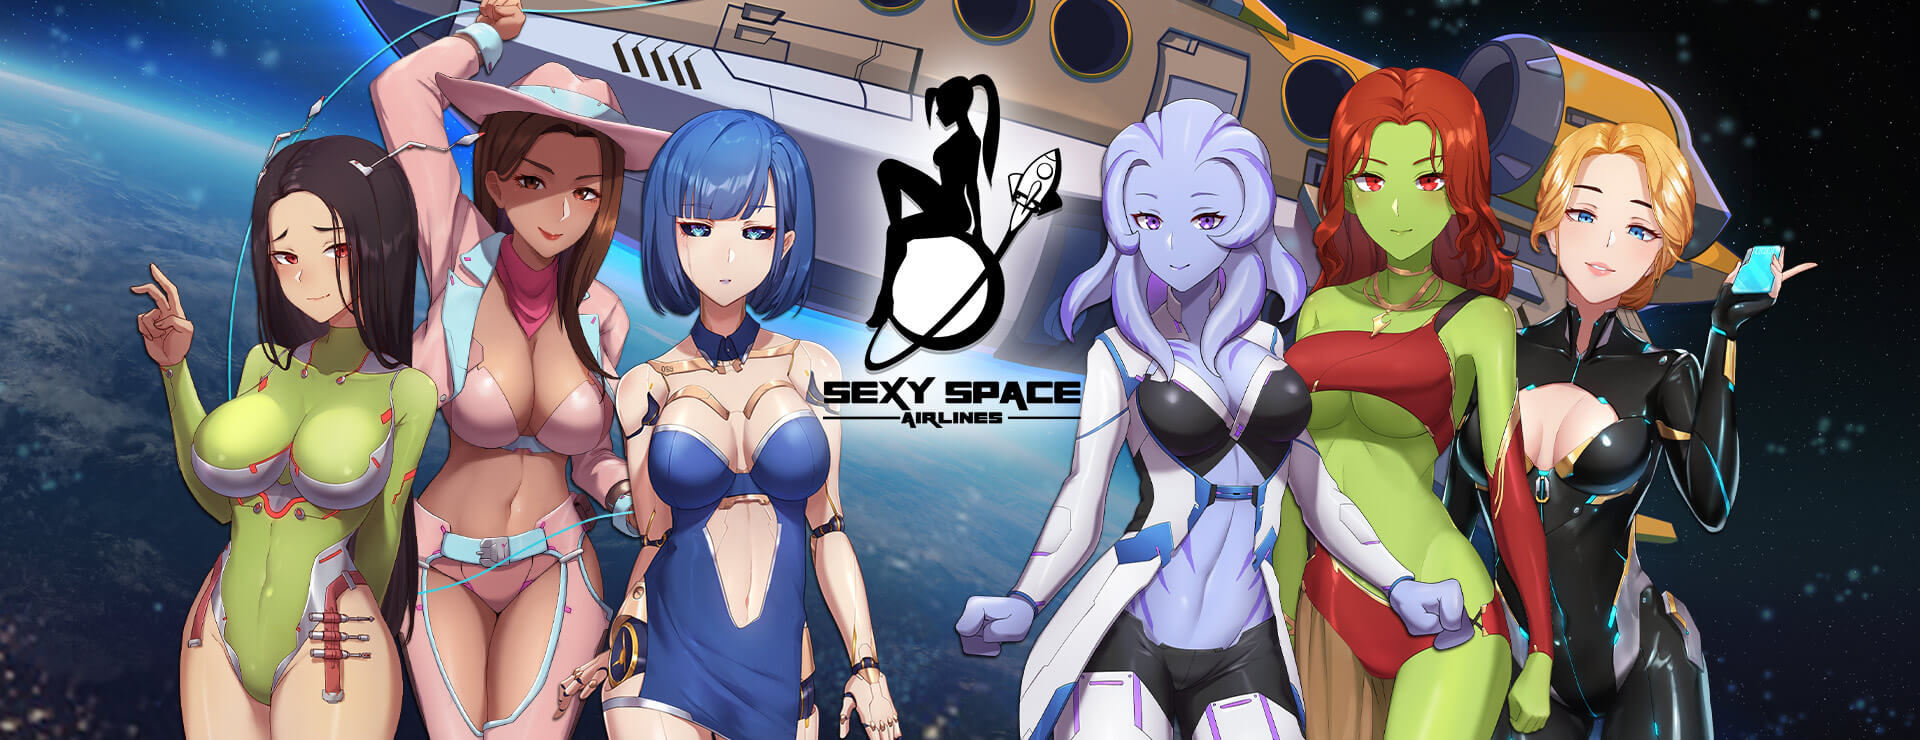 Sexy Space Airlines - Casual Jeu